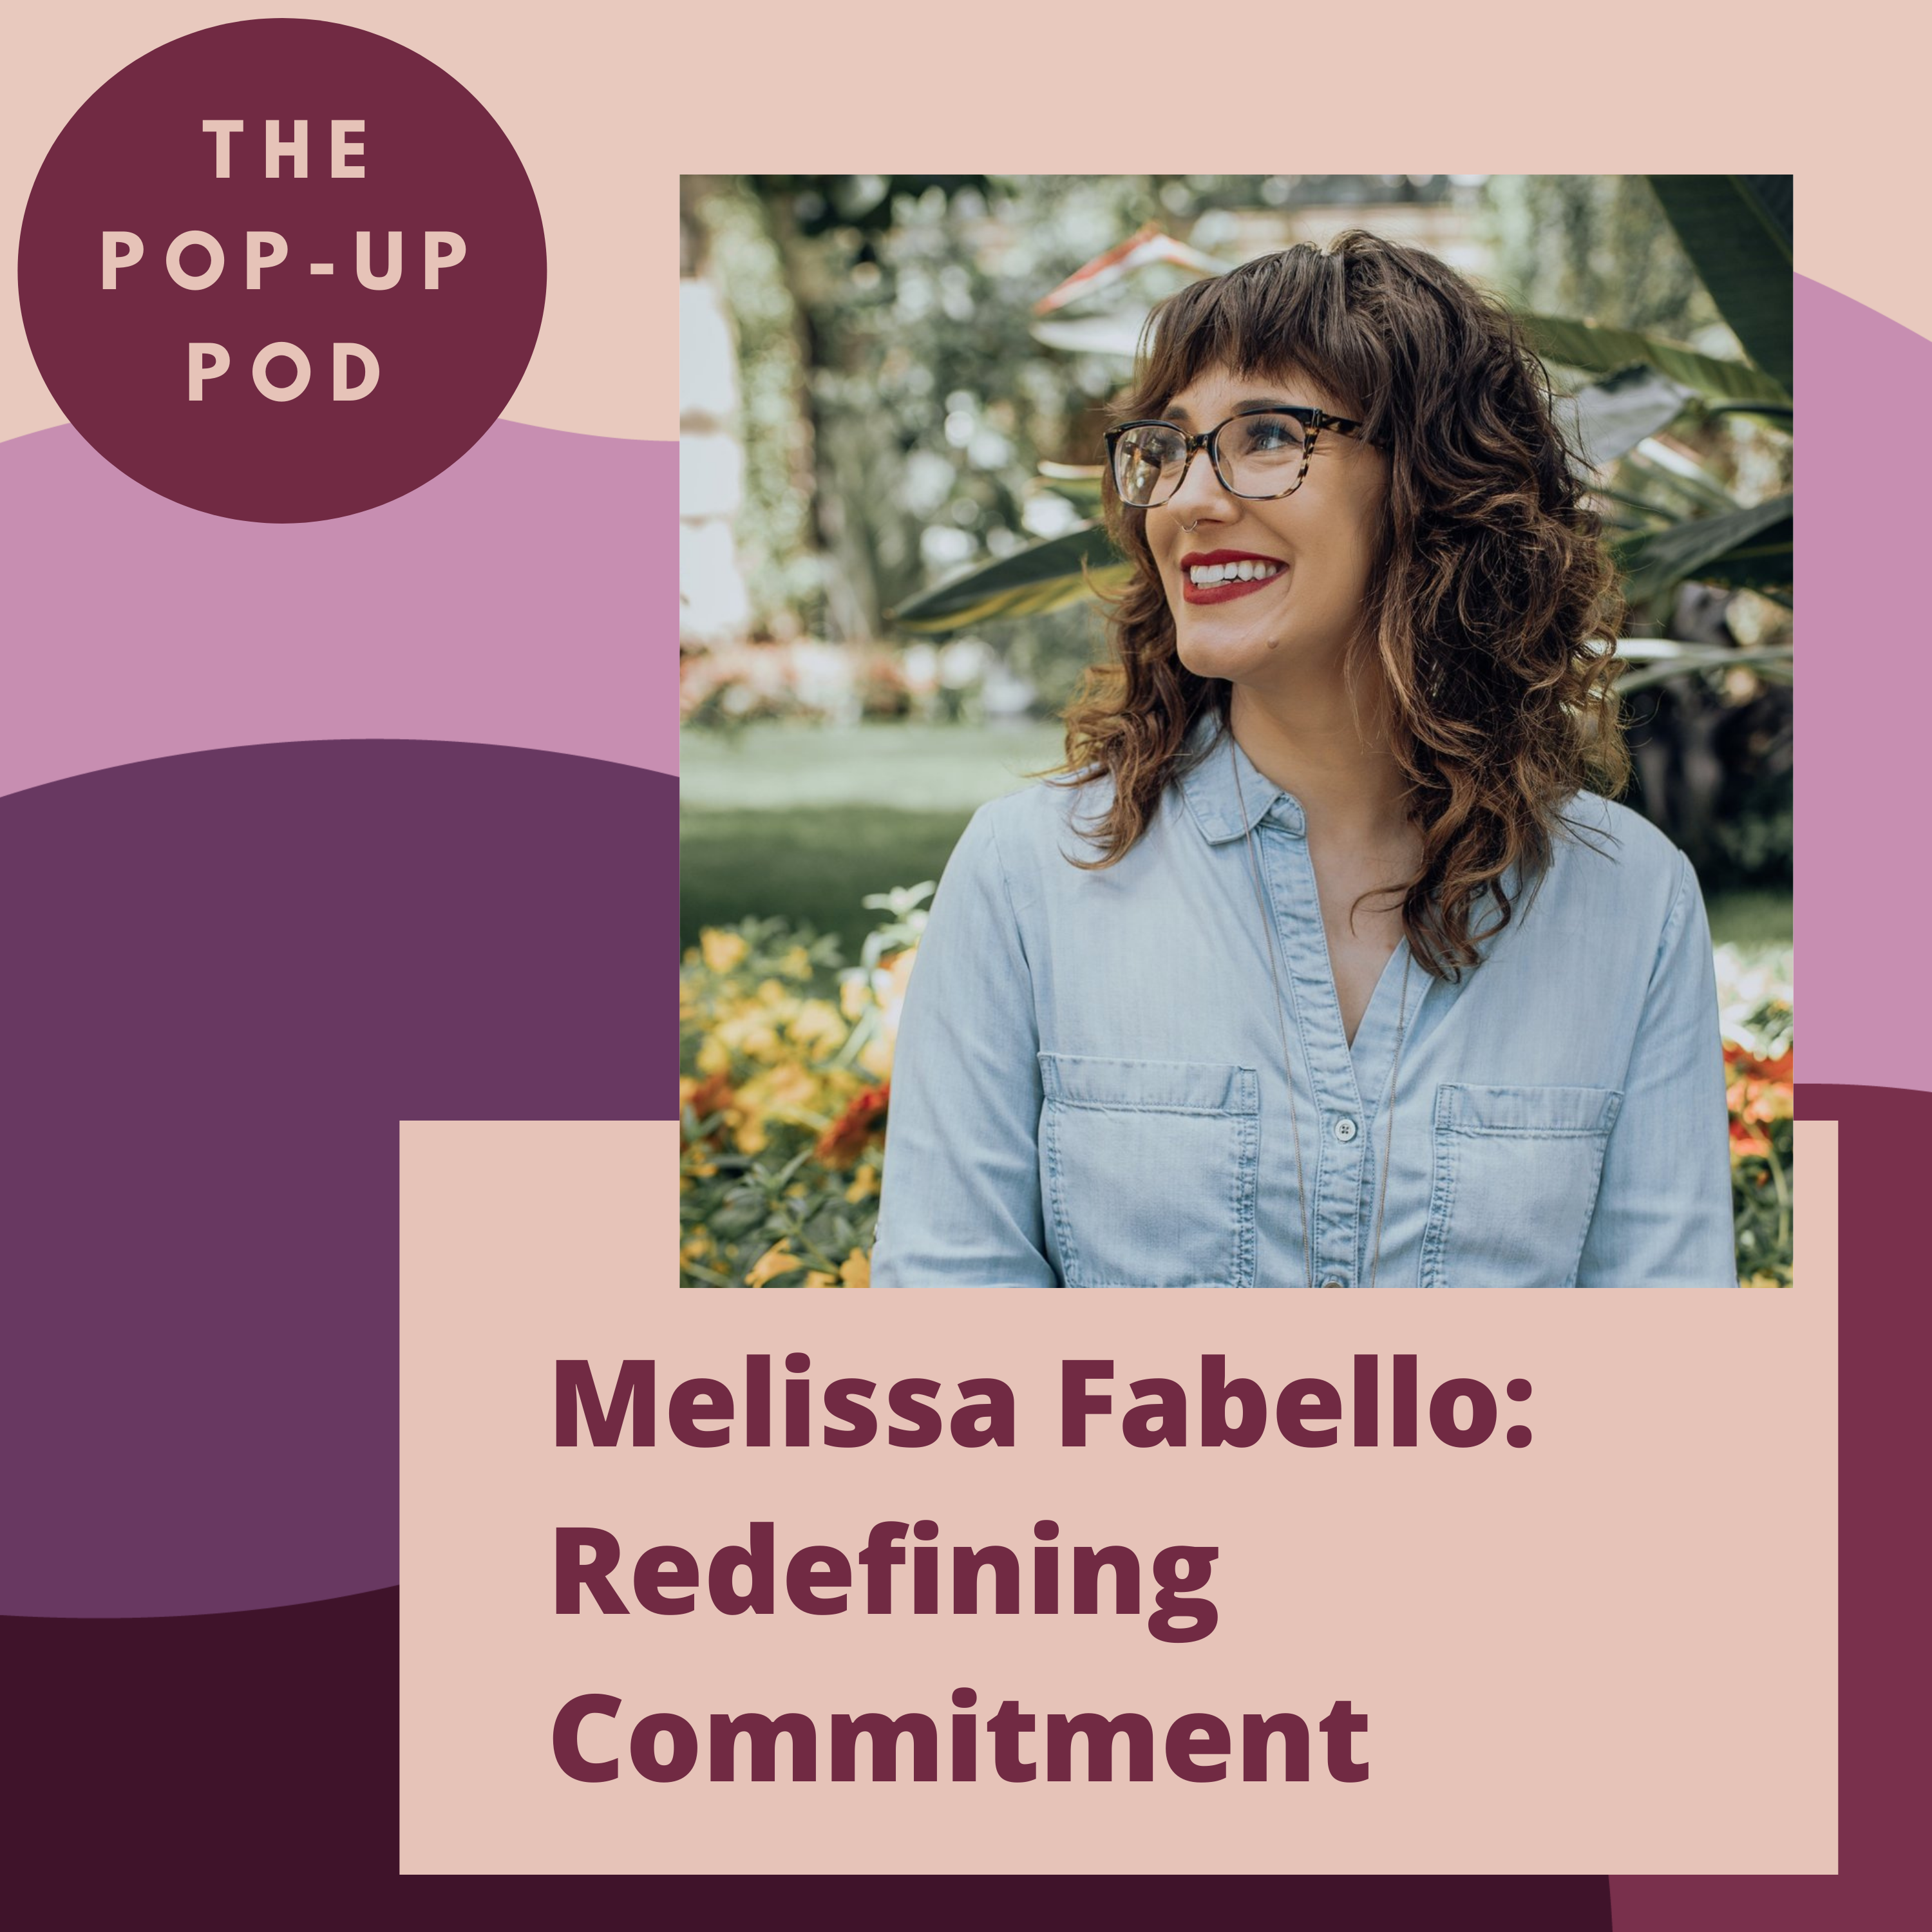 Melissa Fabello: Redefining Commitment